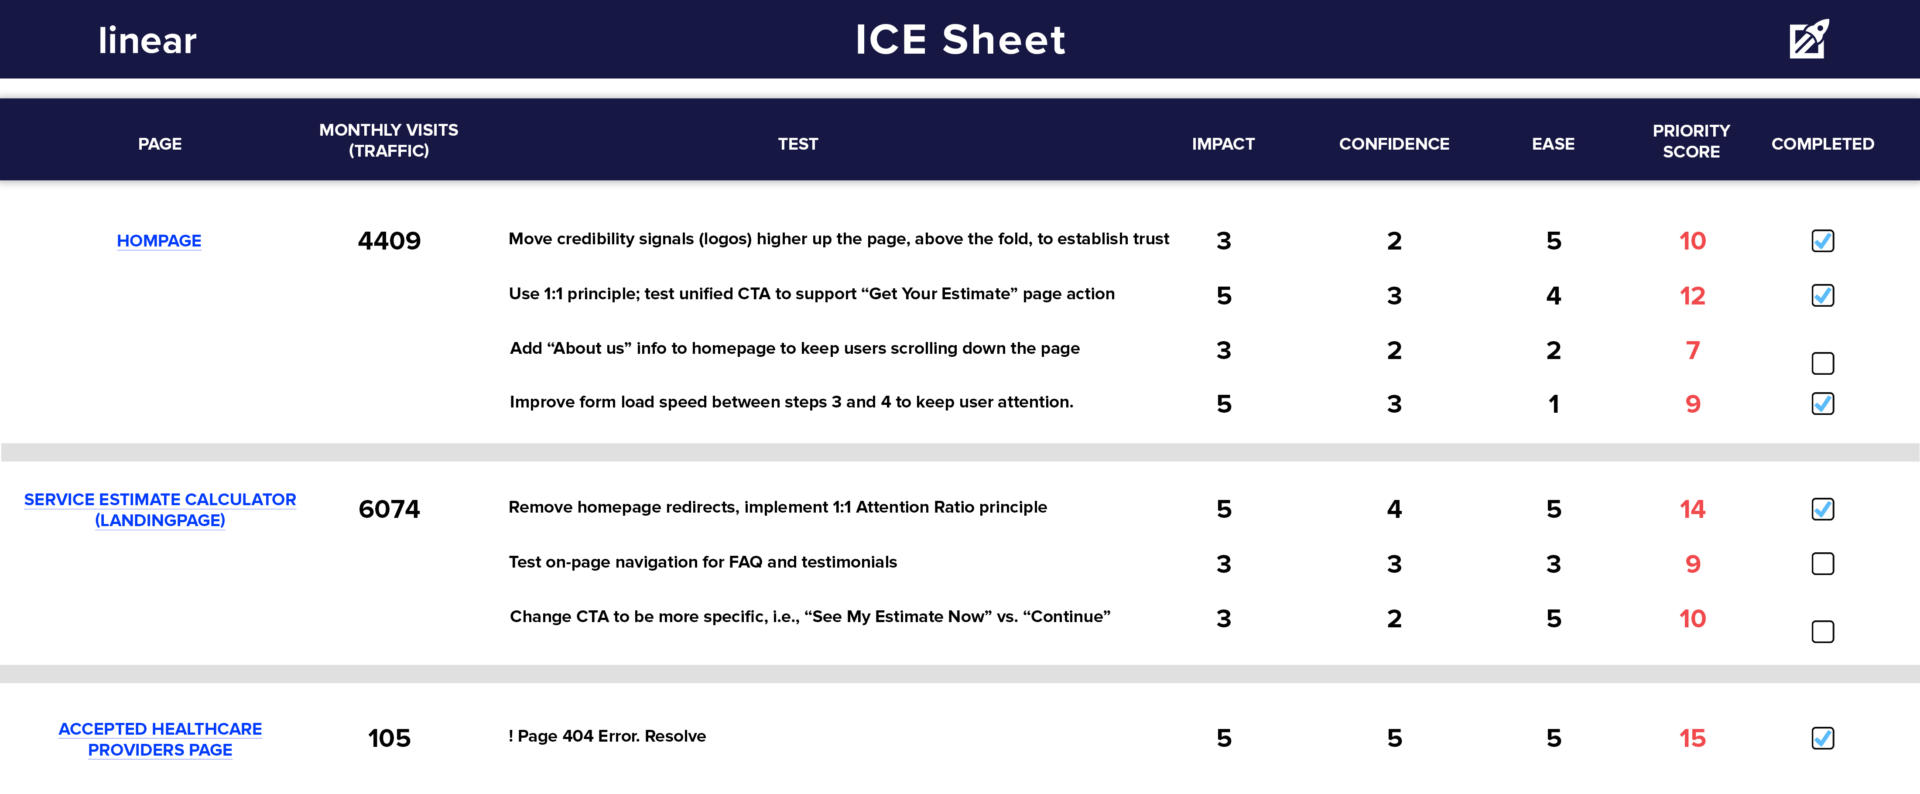 Example of an ICE Sheet for prioritizing landing page tests using ICE Scores